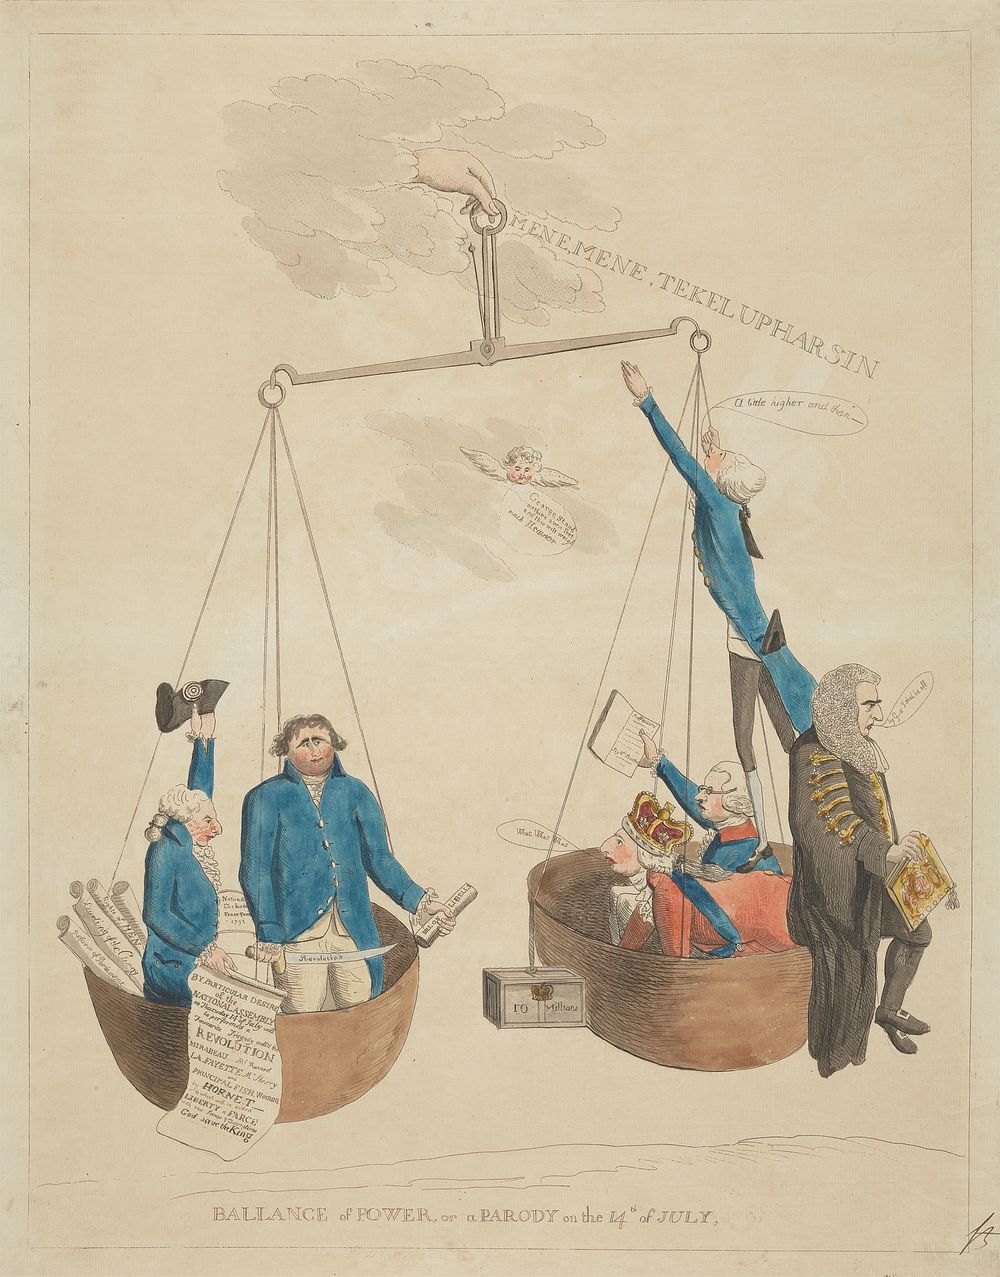 Bal(l)ance of Power or a Parody of the 14th of July....1791